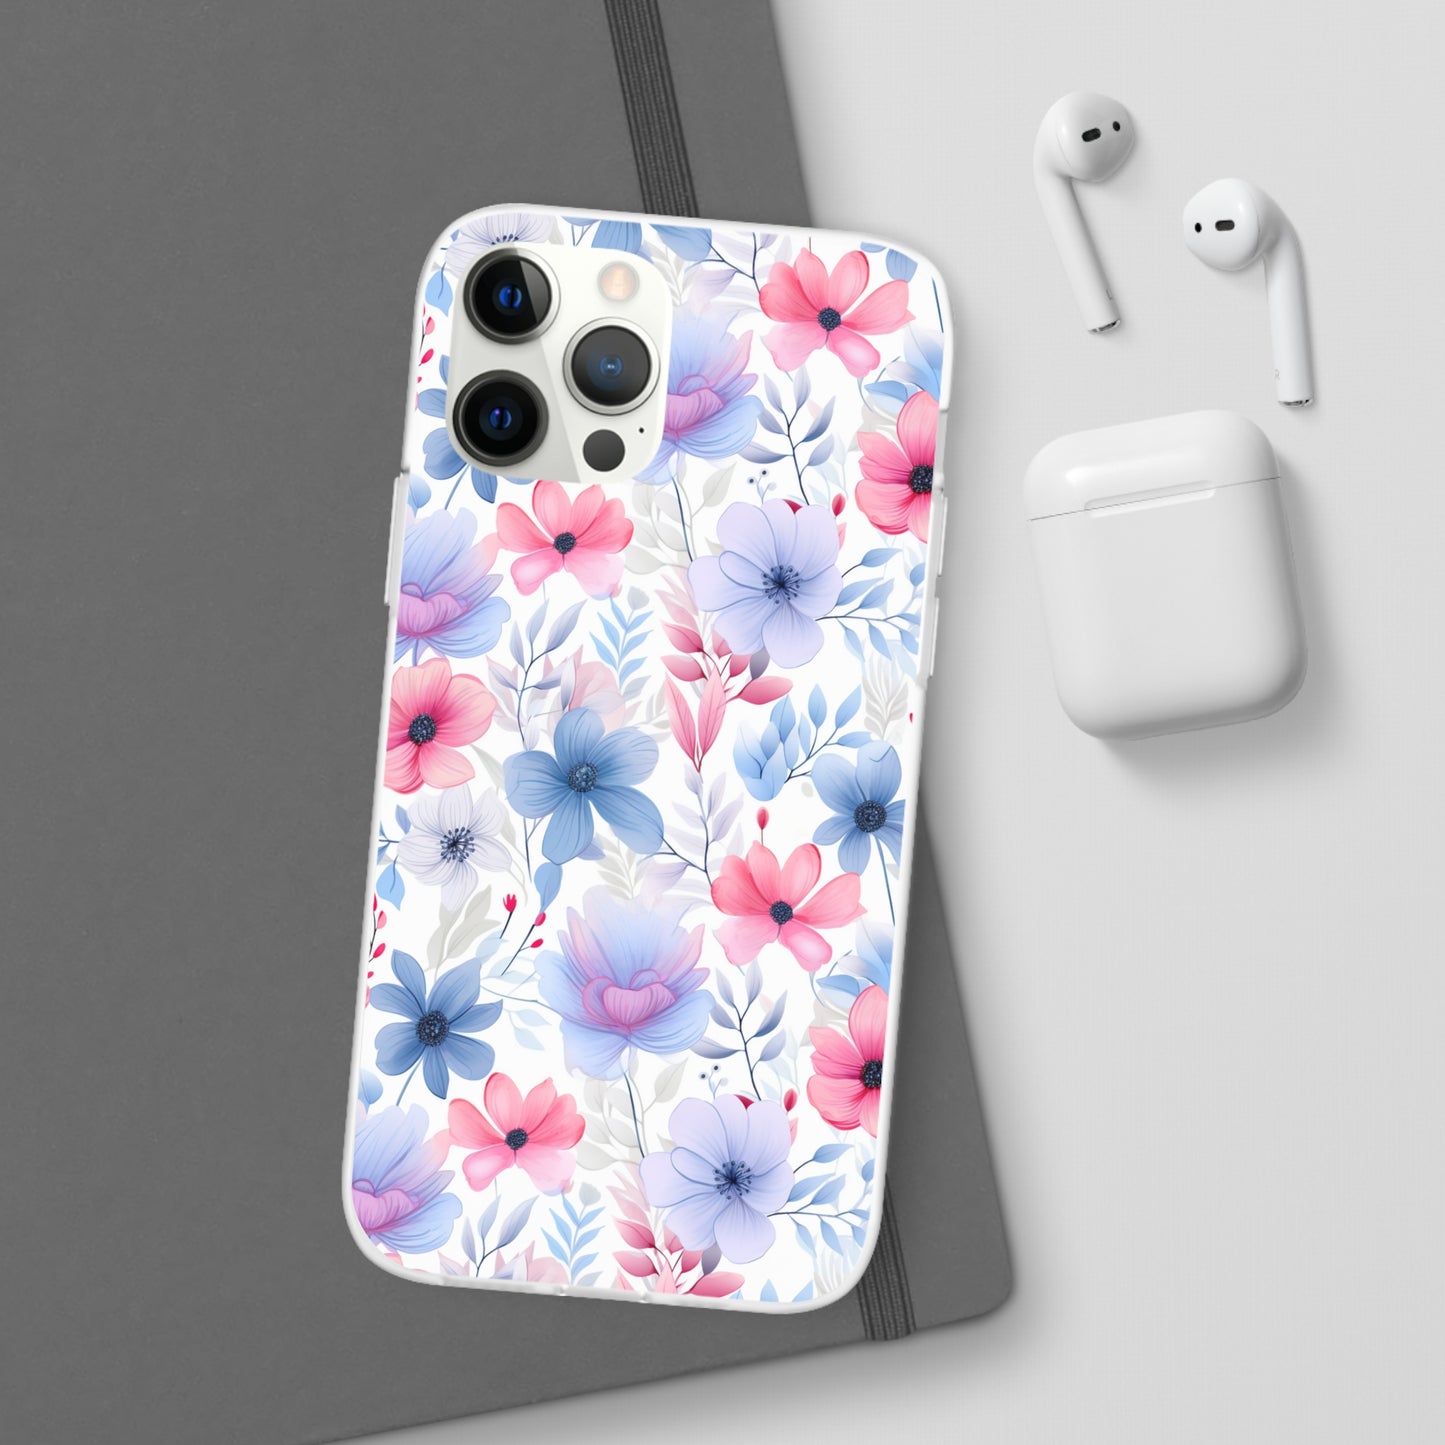 Floral Whispers - Soft Hues of Violets, Pinks, and Blues - Flexi Phone Case Phone Case Pattern Symphony iPhone 12 Pro with gift packaging  